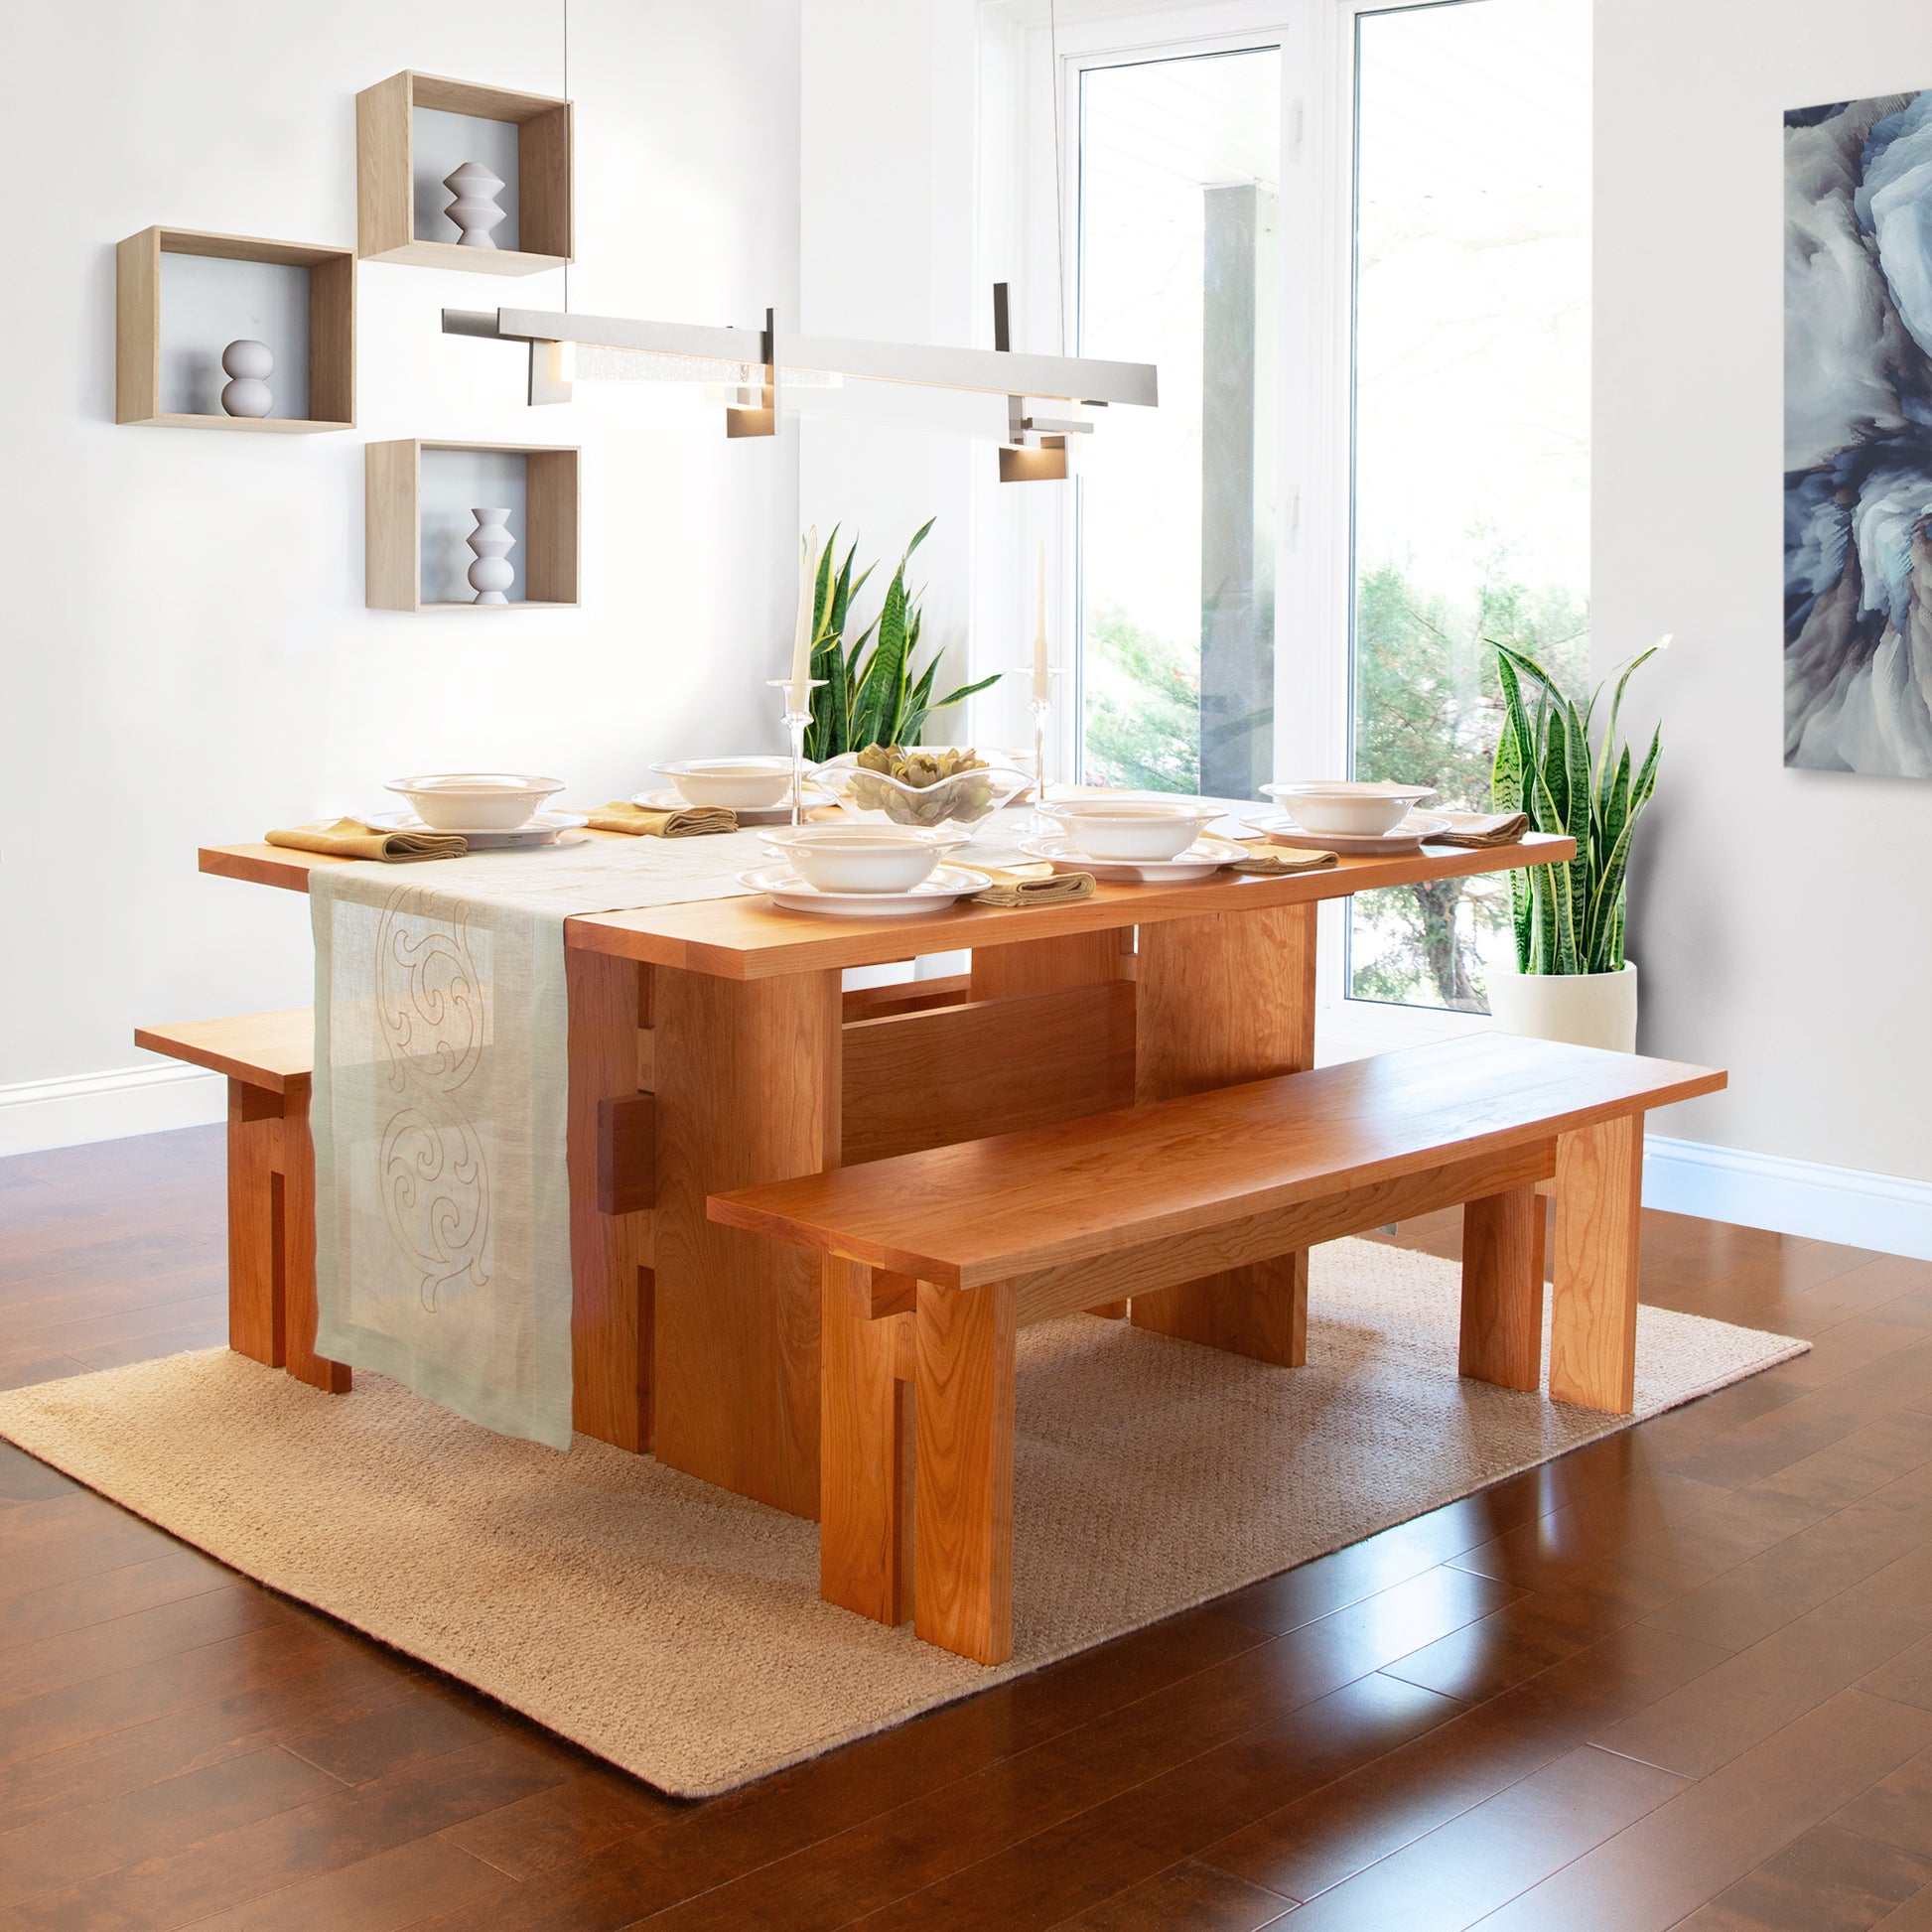 A Vermont Furniture Designs Modern American Dining Table set with matching benches, laid with plates and cups, in a room with hardwood floors, a large window, and modern decor.